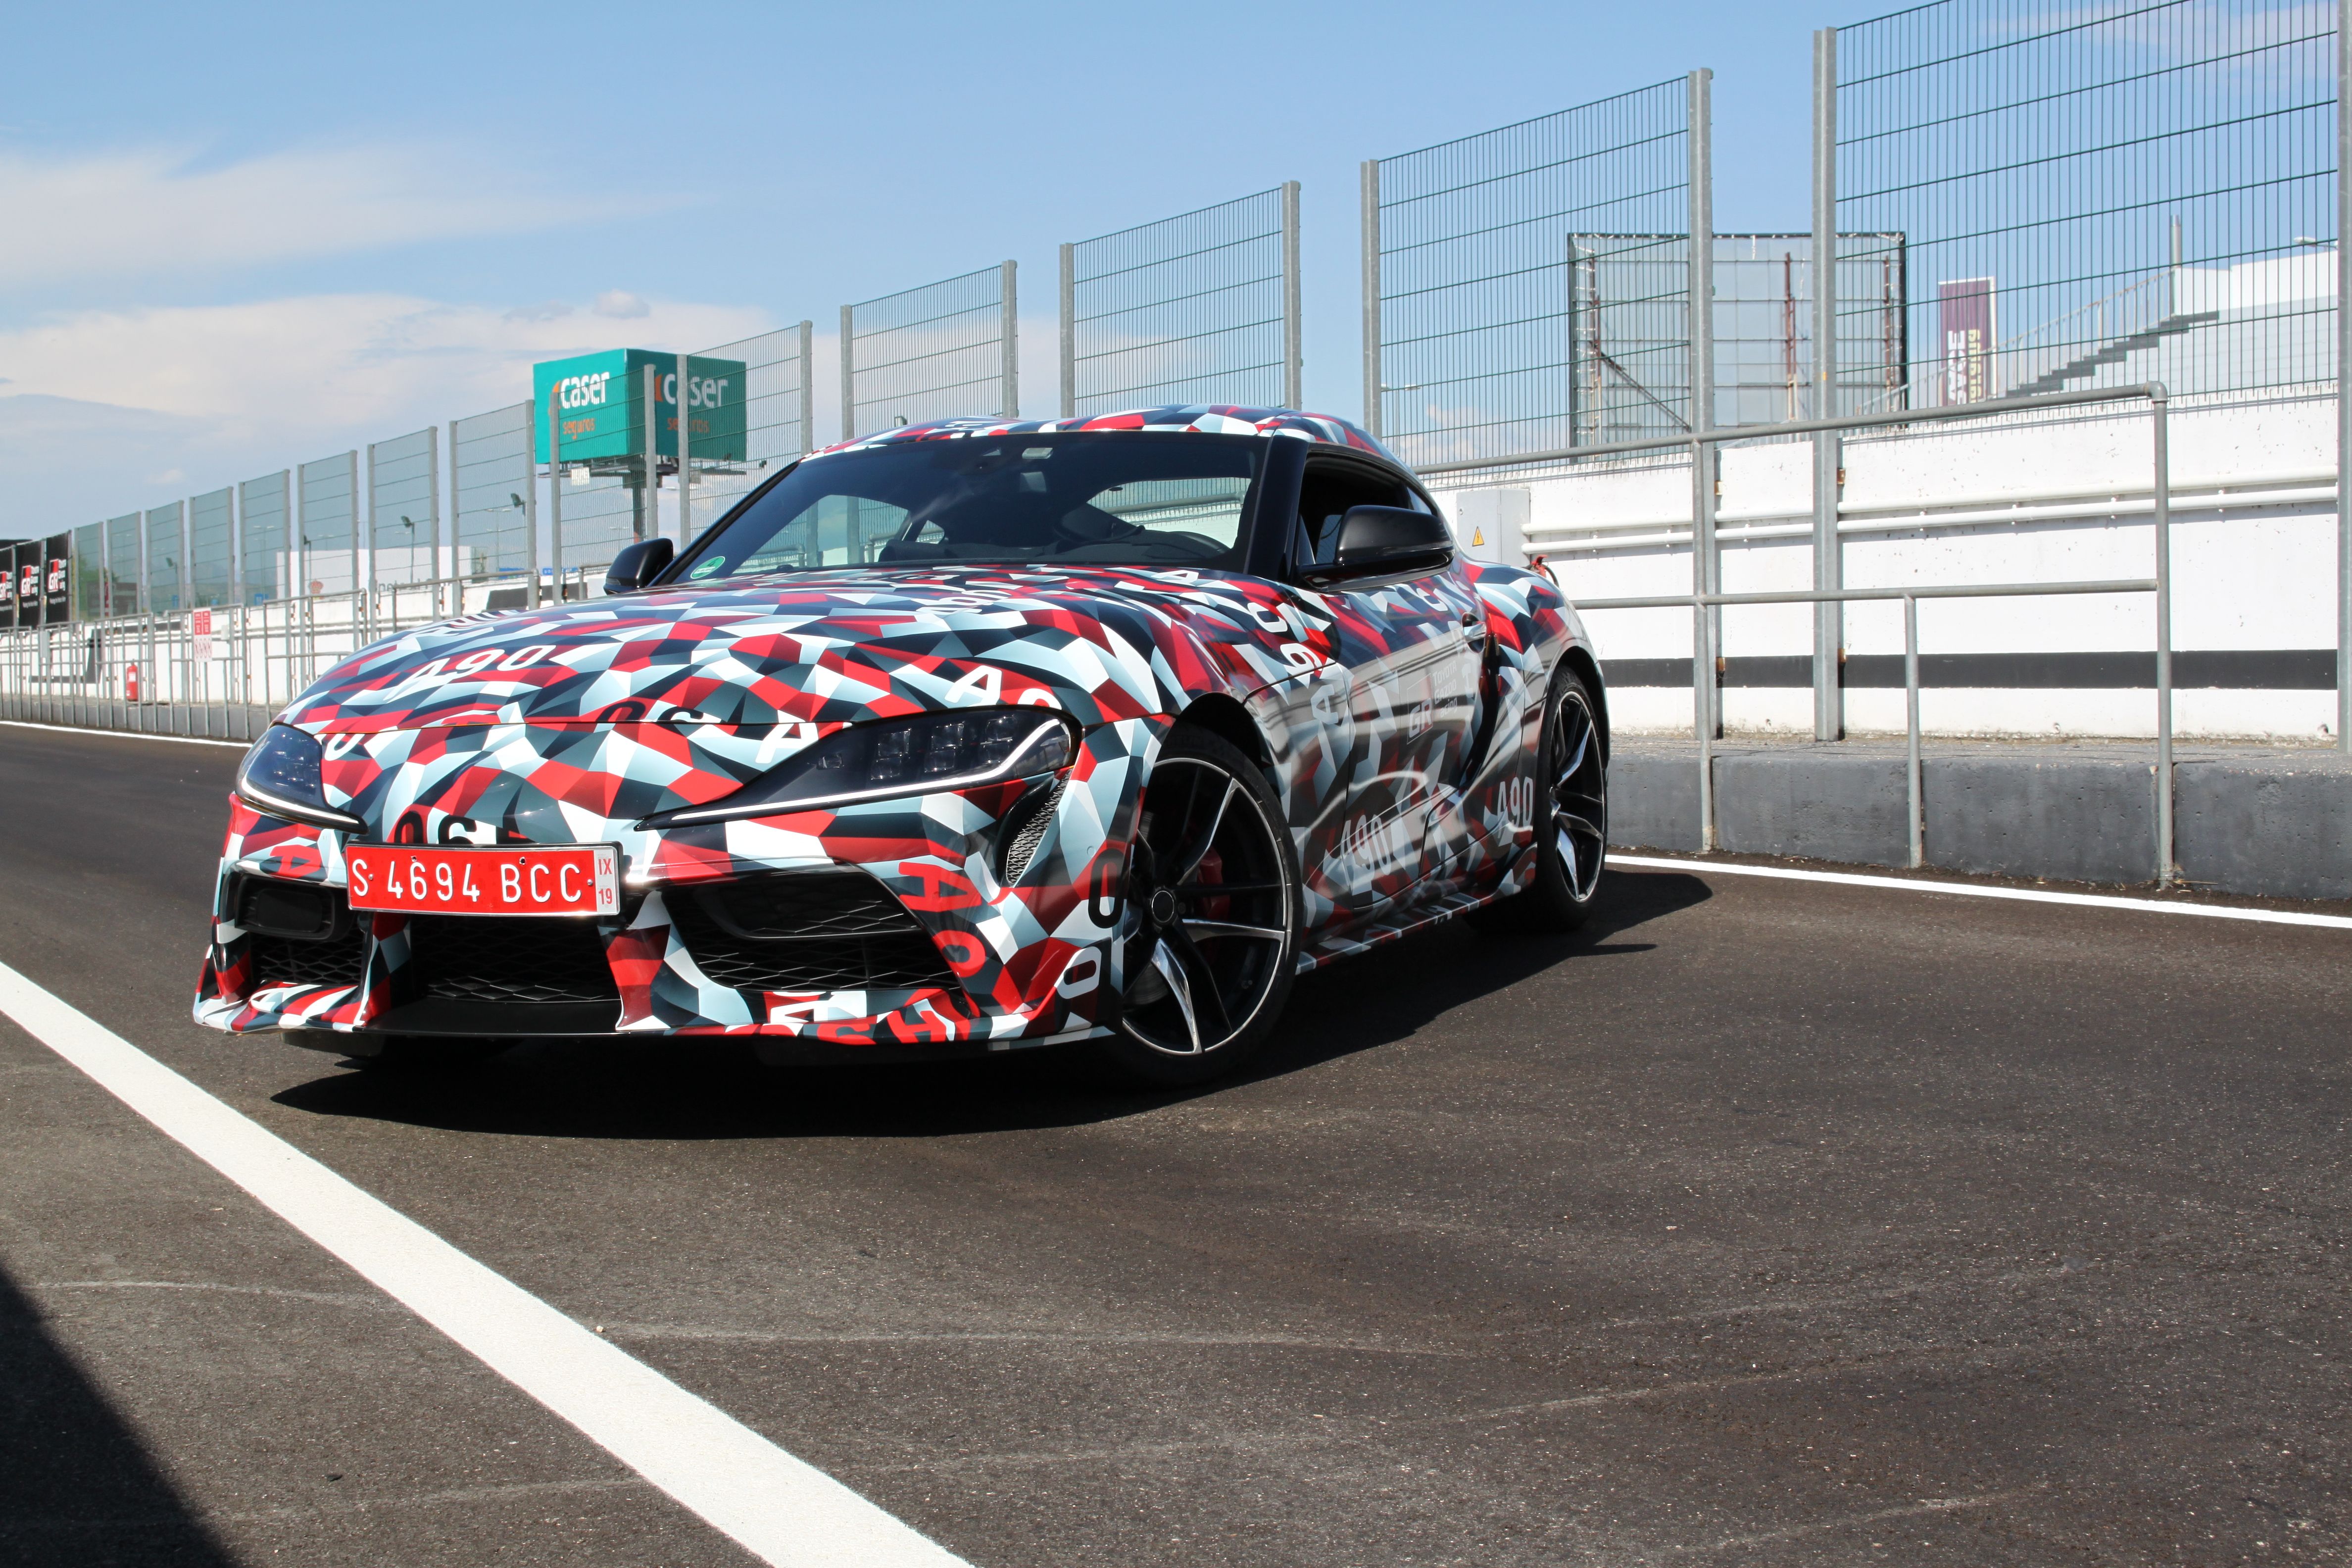 The Best 2020 Toyota Supra Wallpaper. Redesign Cars 2019